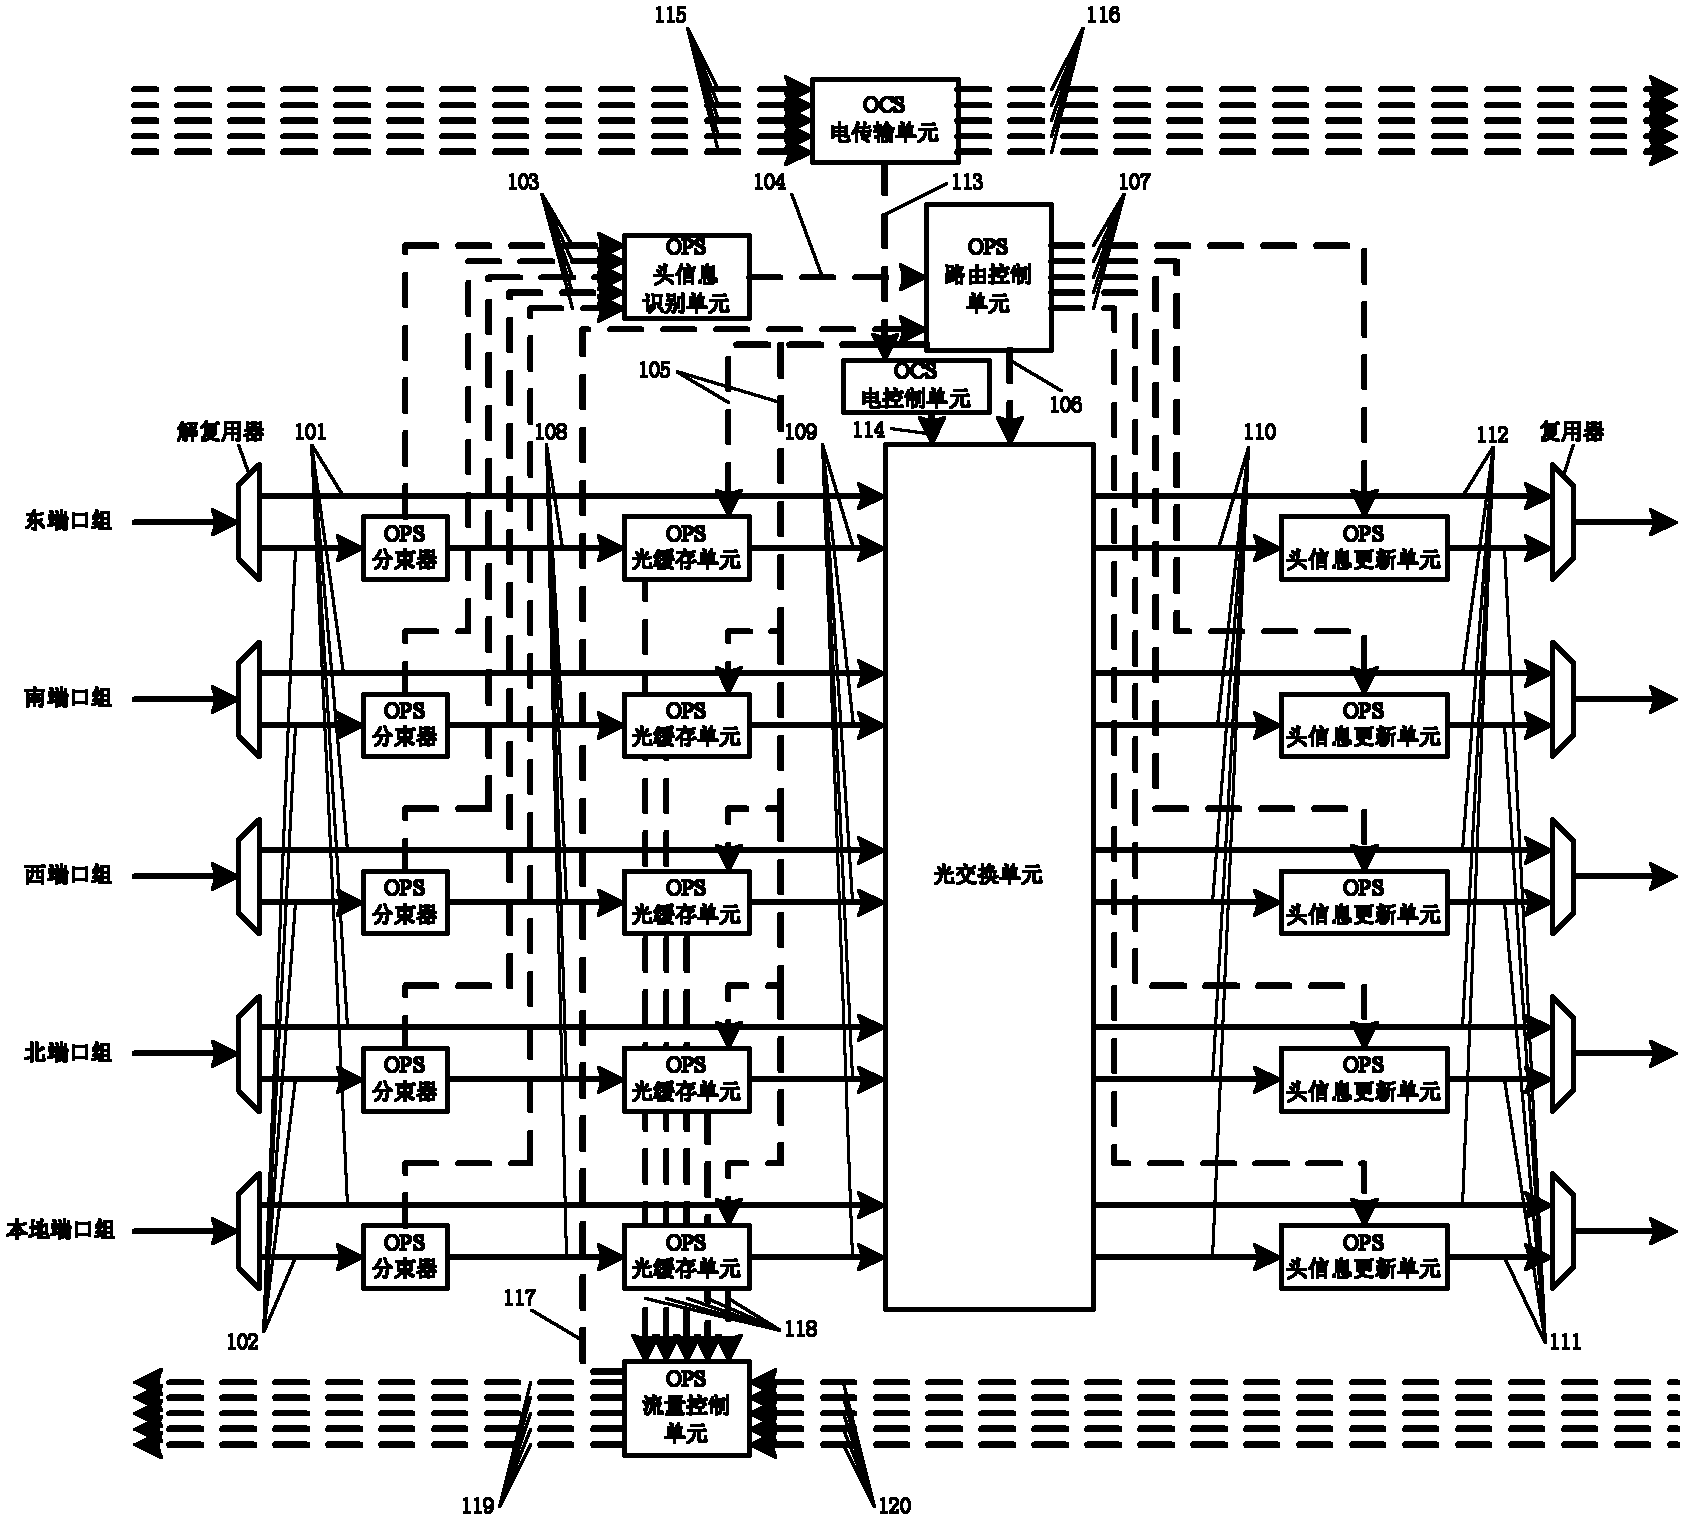 On-Chip Optical Router for Hybrid Switching